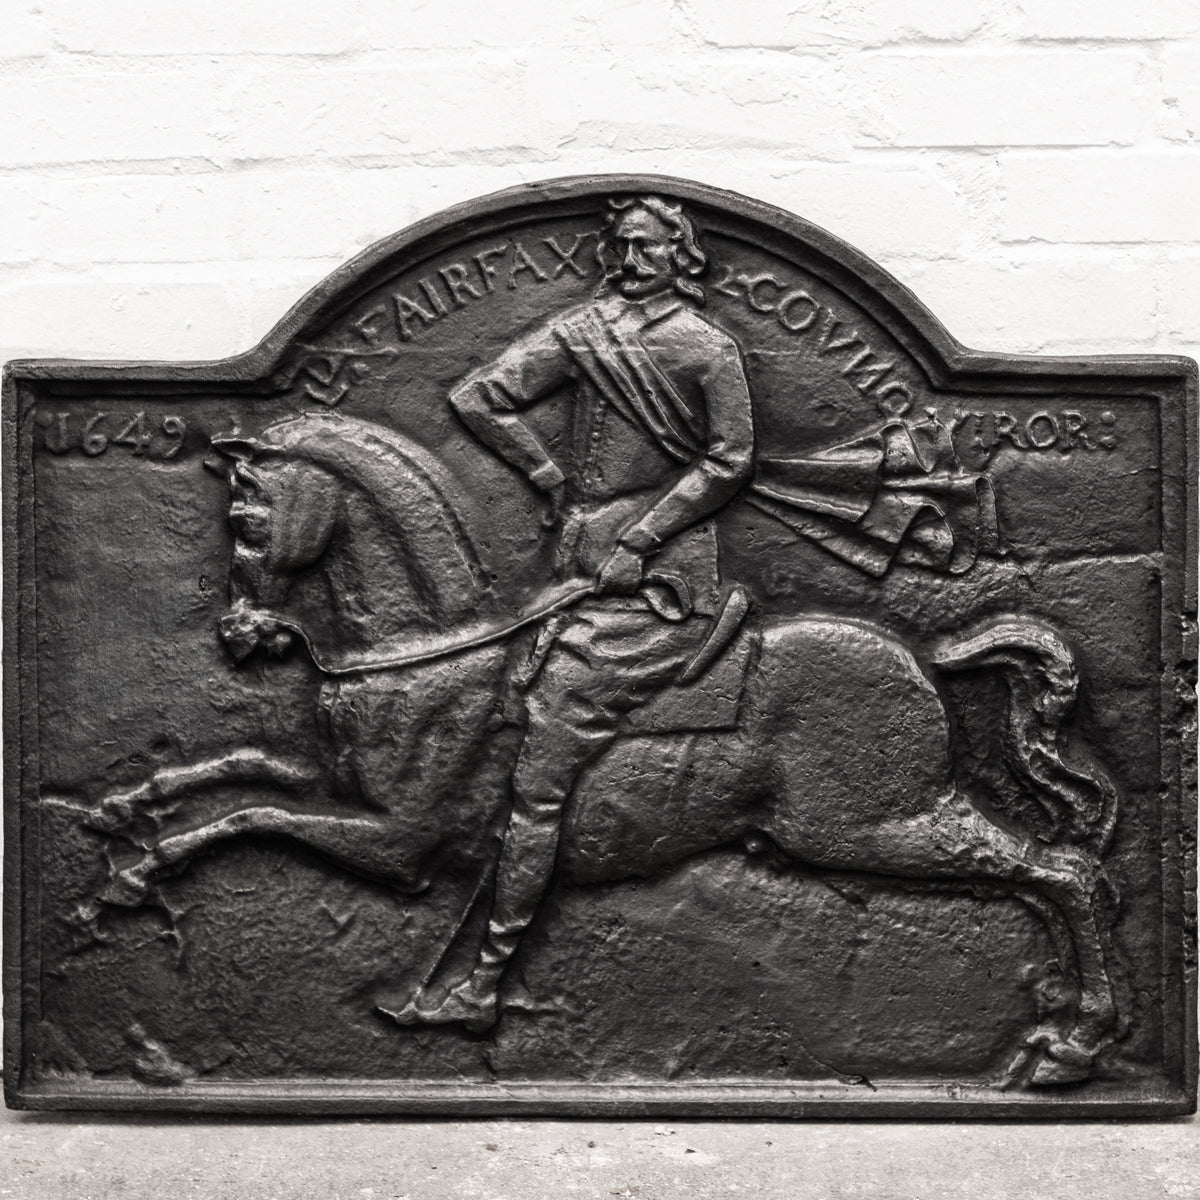 Reclaimed Carron Foundry Cast Iron Fireback (2 Available) | The Architectural Forum